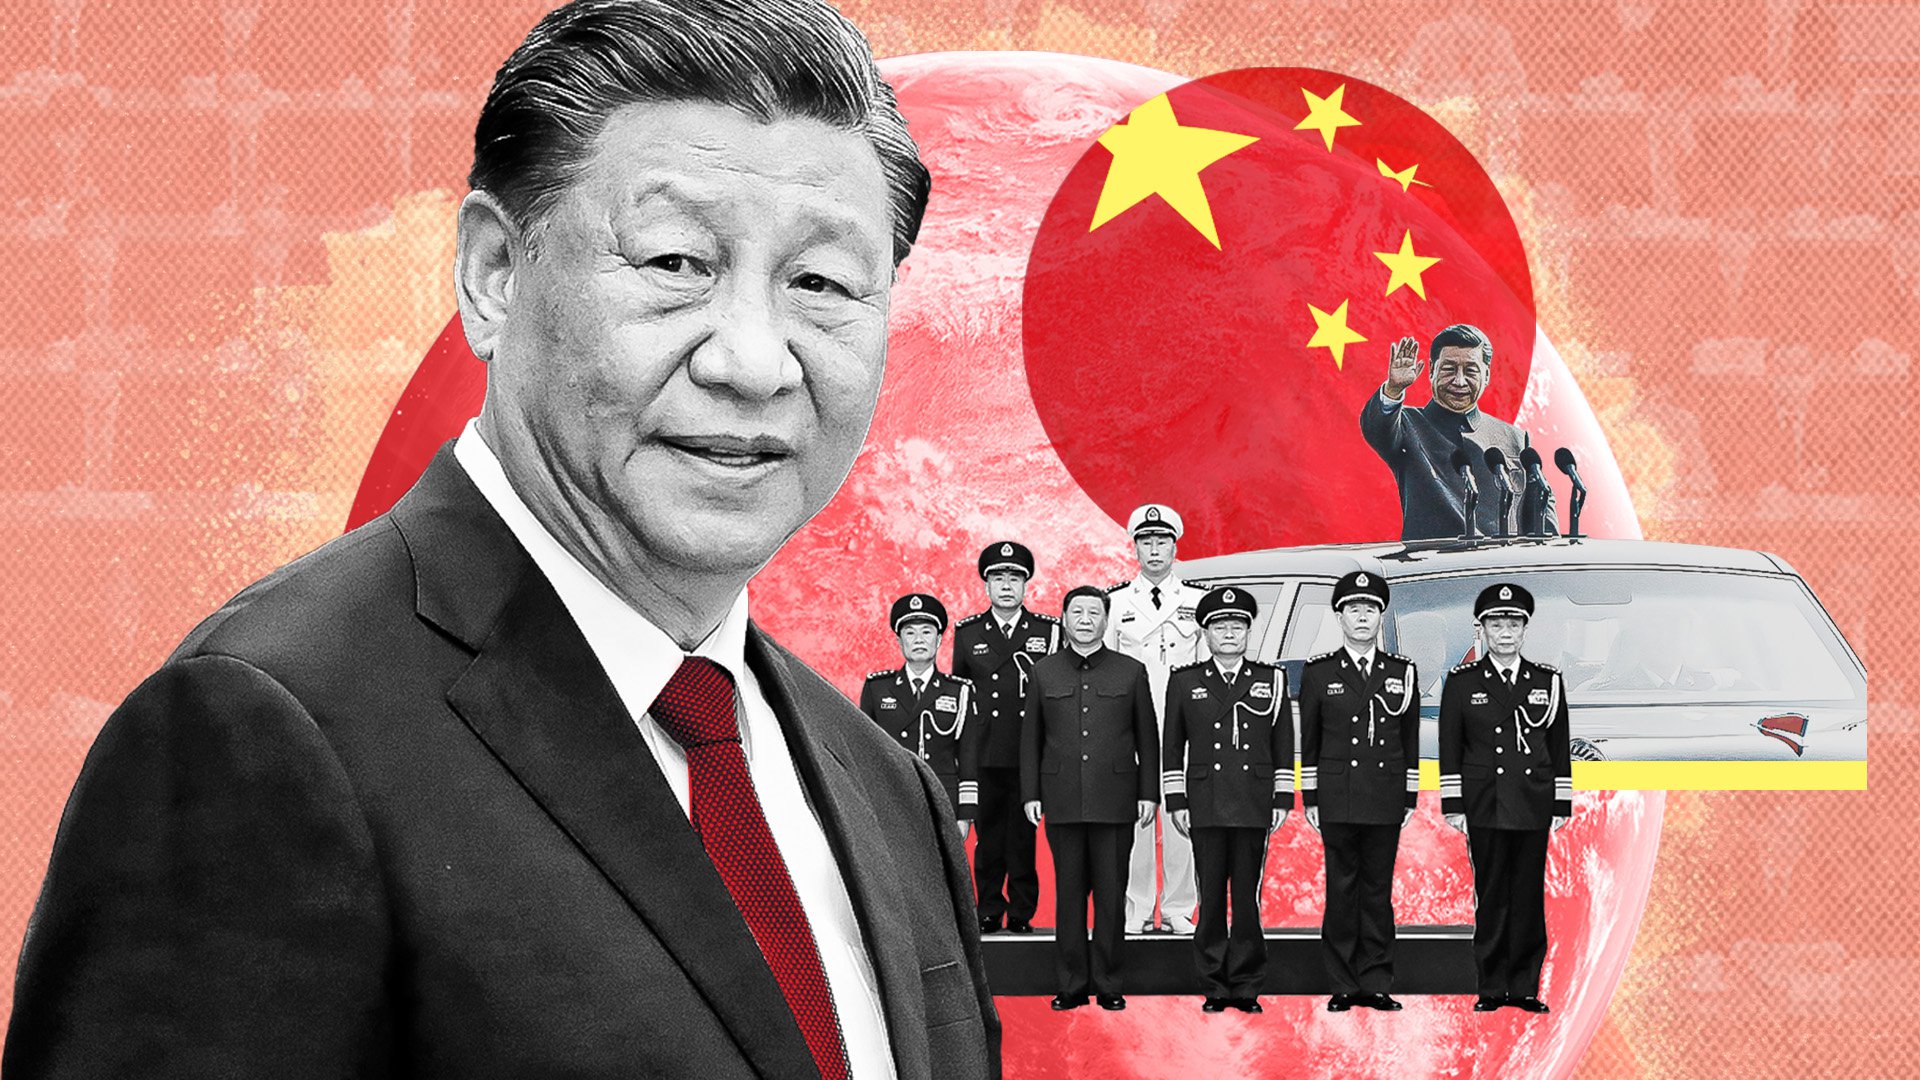 xi jinping has plans for the whole world, and we might not like them